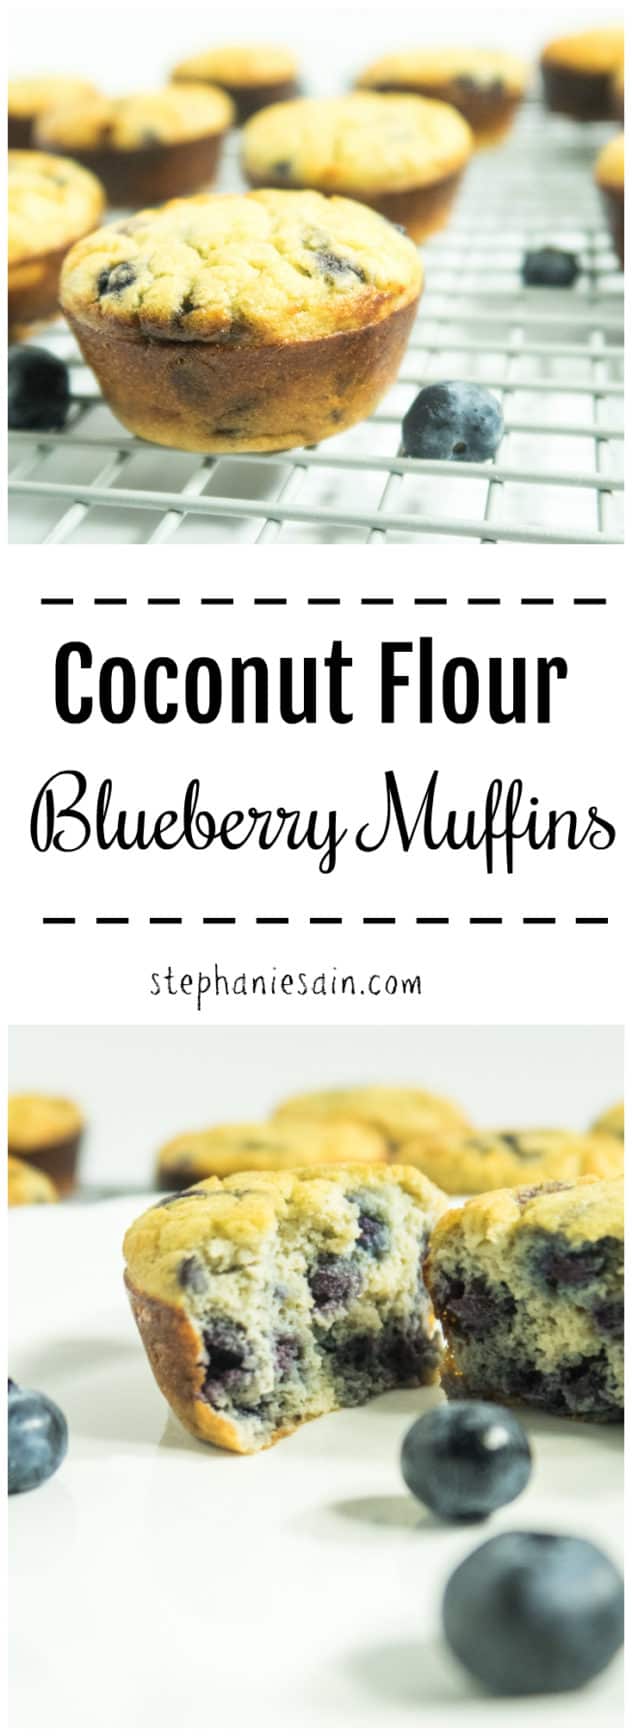 Coconut Flour Blueberry Muffins are deliciously moist, bursting with fresh blueberry flavor and naturally sweetened. Gluten Free, Vegetarian, and no refined sugars.